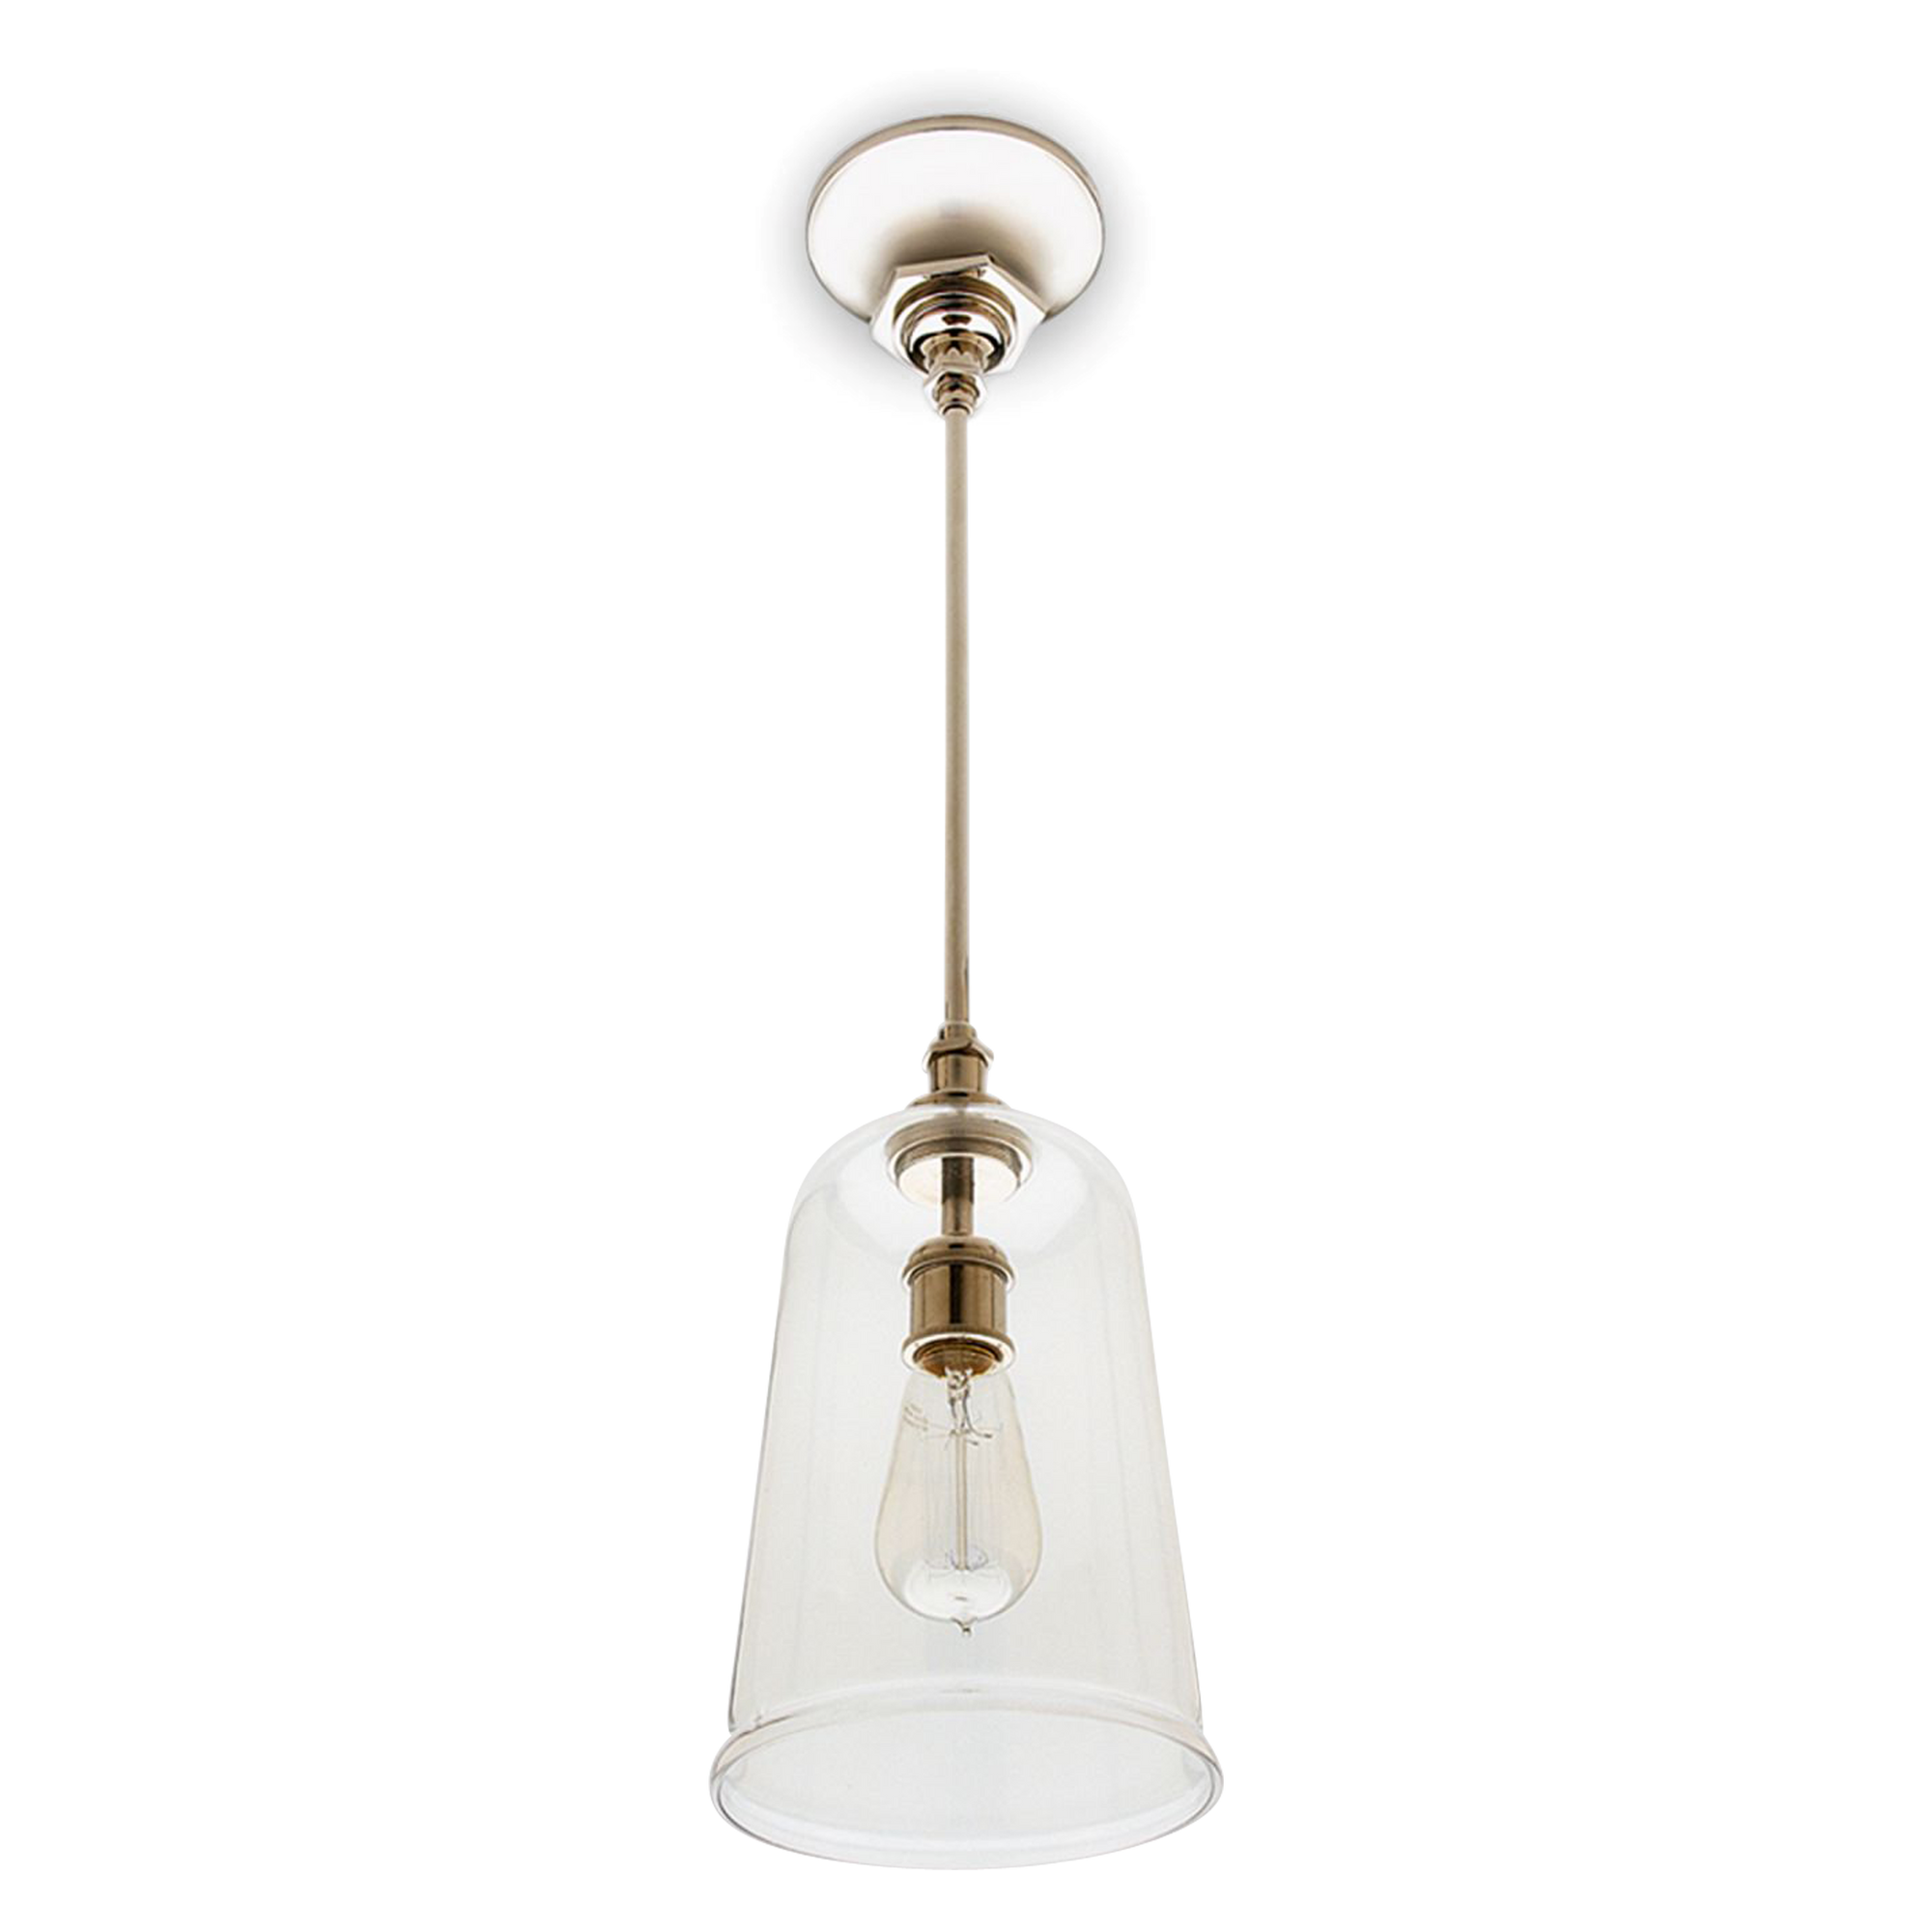 A modern pendant with a hand blown glass shade.